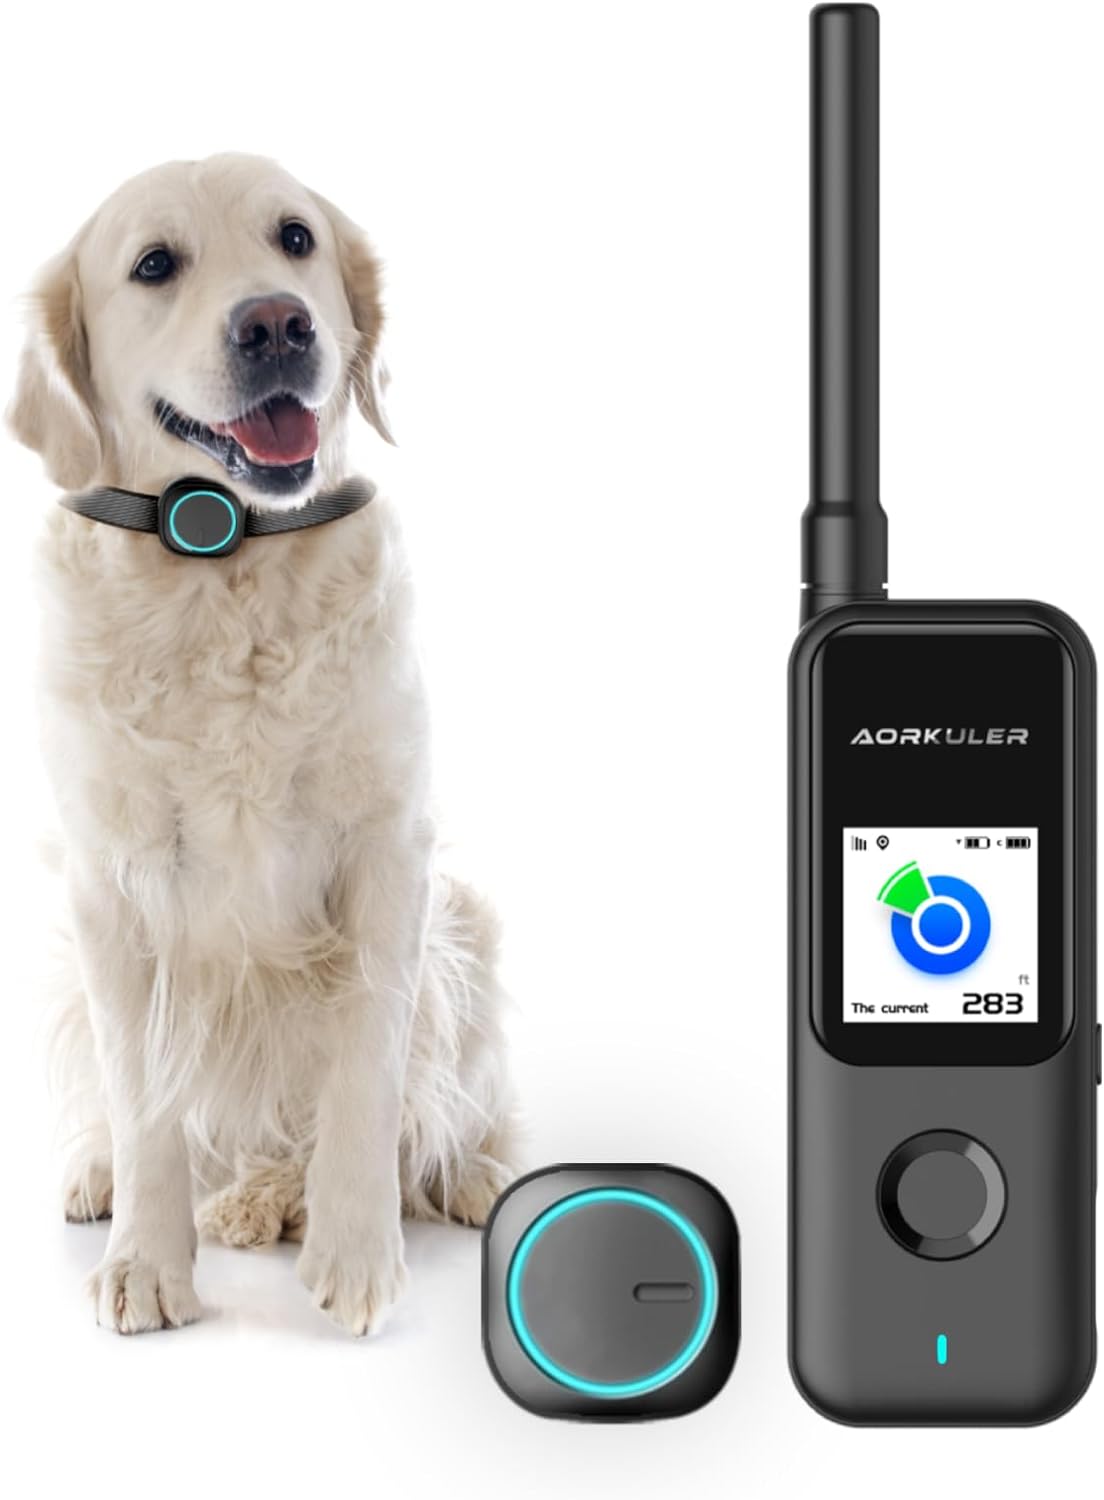 Aorkuler GPS Dog Tracker, Pet Tracker No Monthly Fee No Subscription, Dog Tracker Without Cellular Networks,Real-Time Tracking Device for Dog and Pets, Dog Tracker Without Mobile Phones